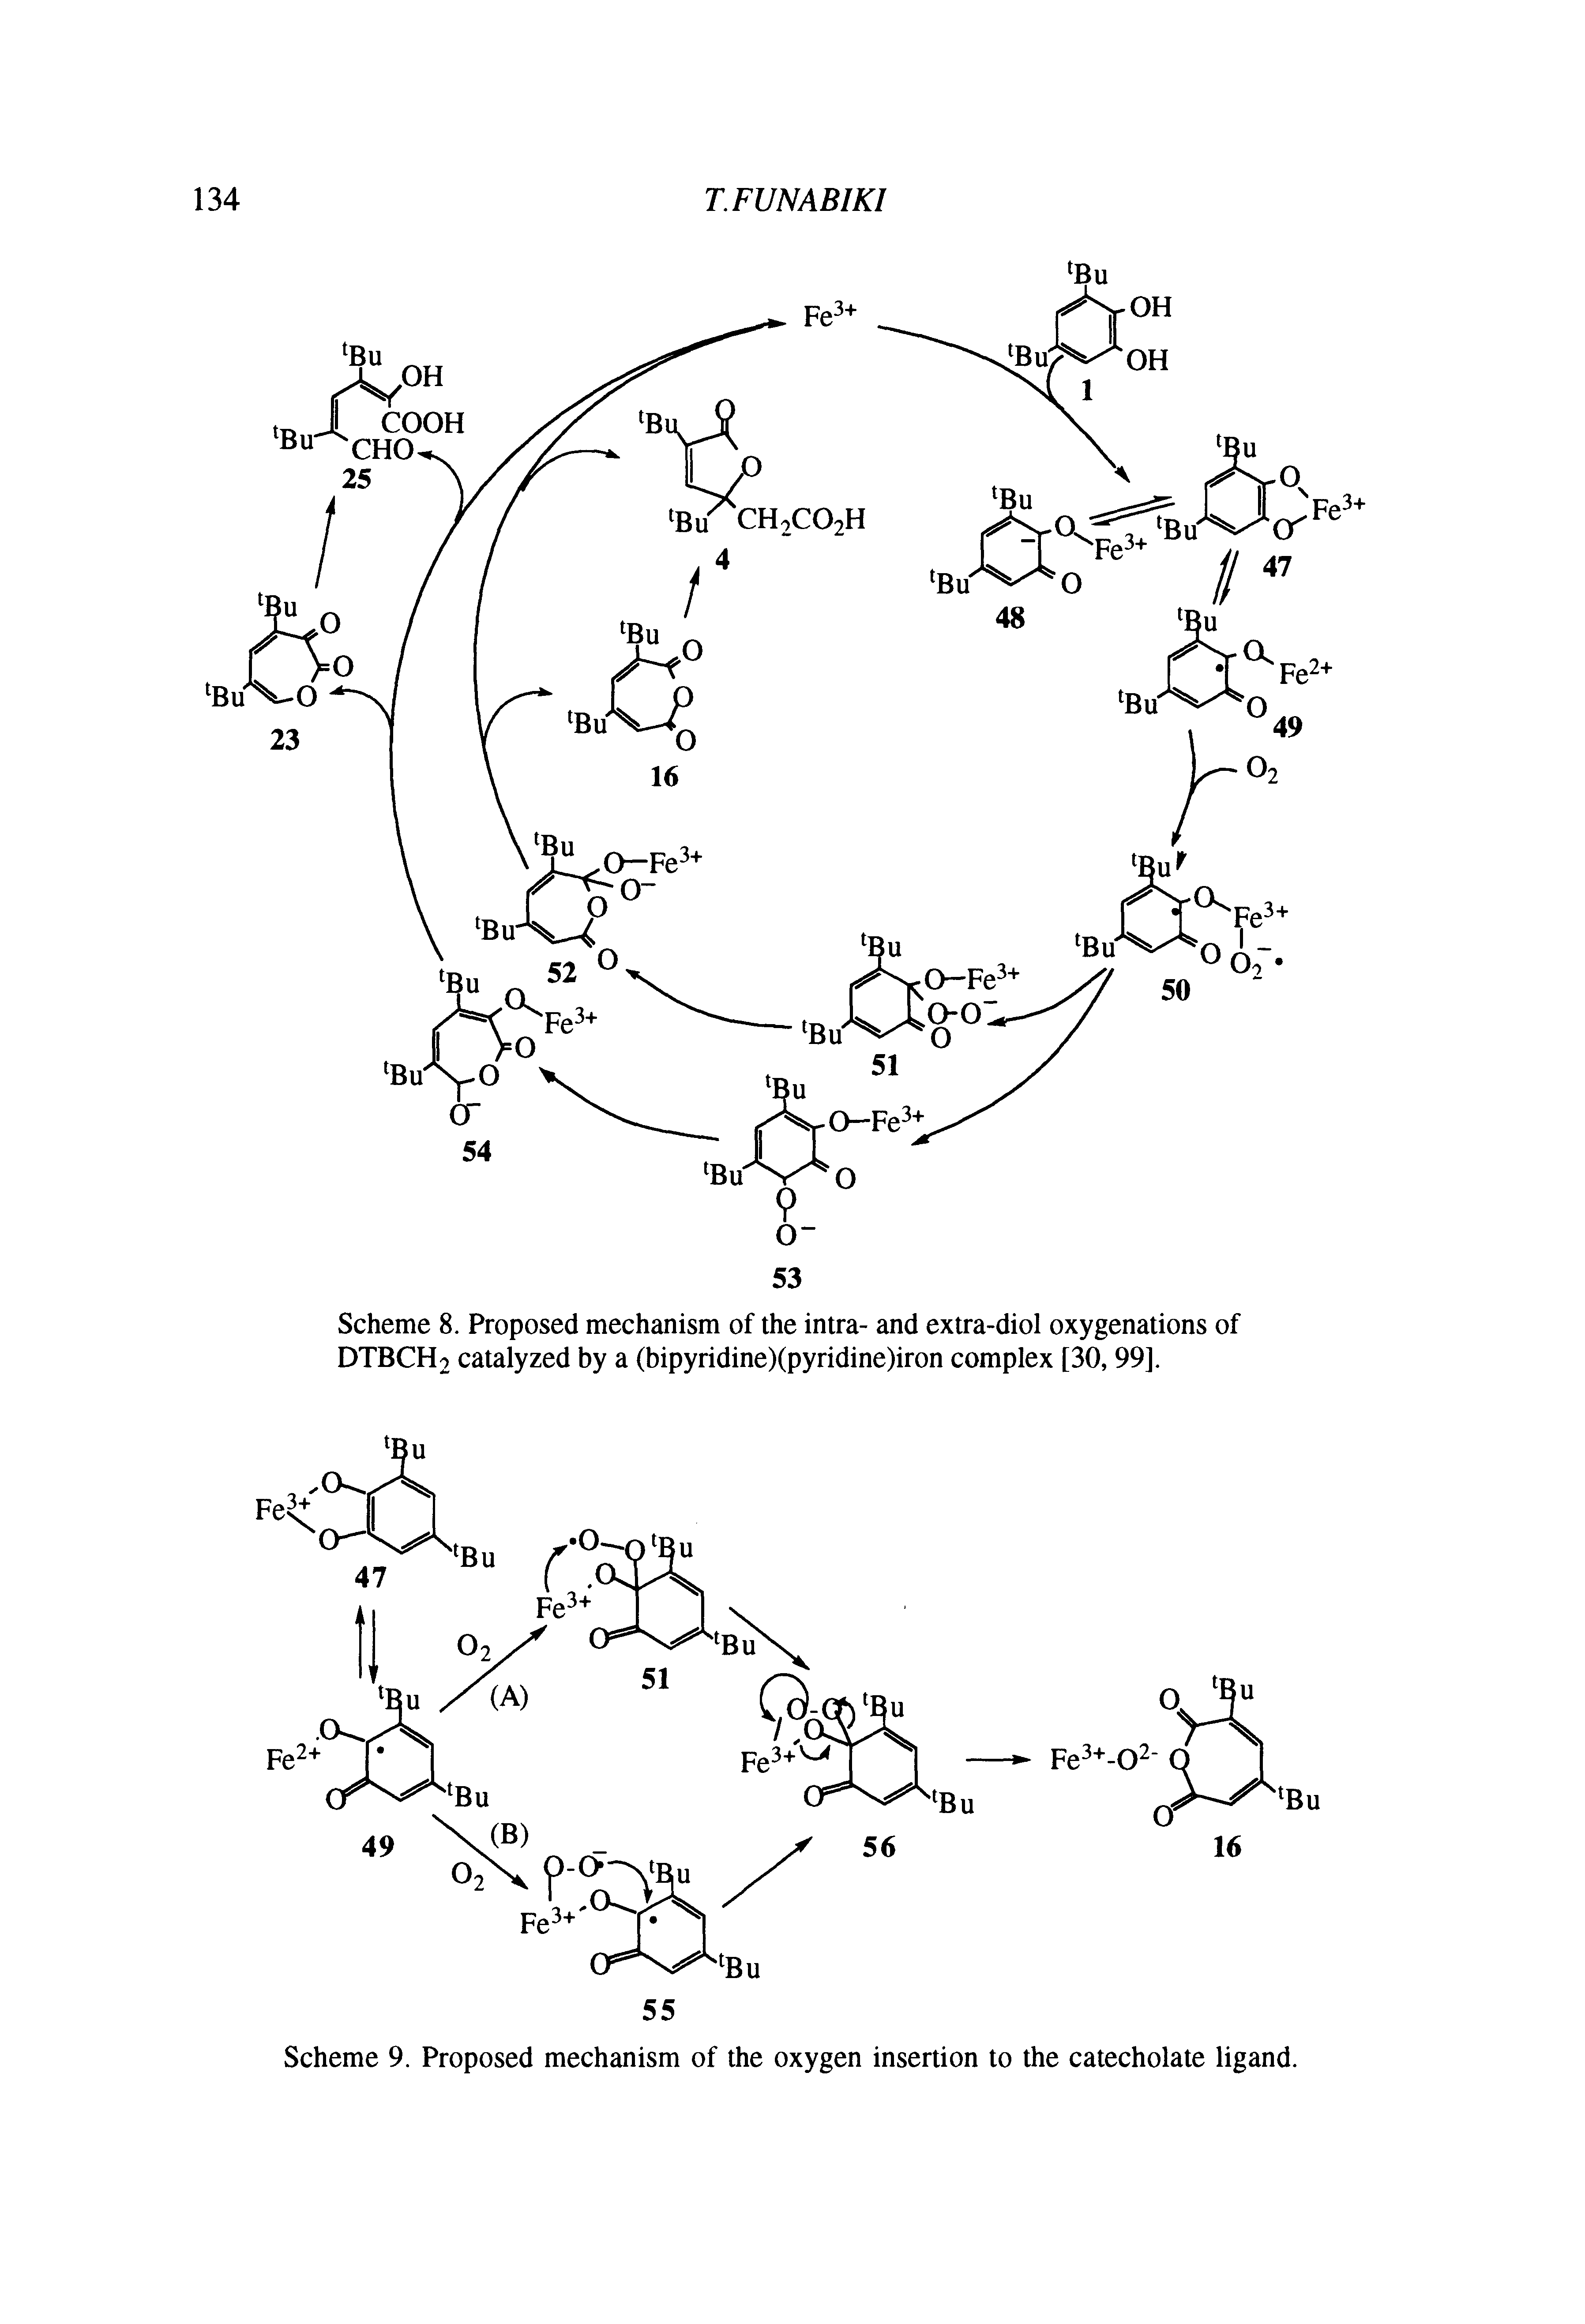 Scheme 8. Proposed mechanism of the intra- and extra-diol oxygenations of DTBCH2 catalyzed by a (bipyridine)(pyridine)iron complex [30, 99].